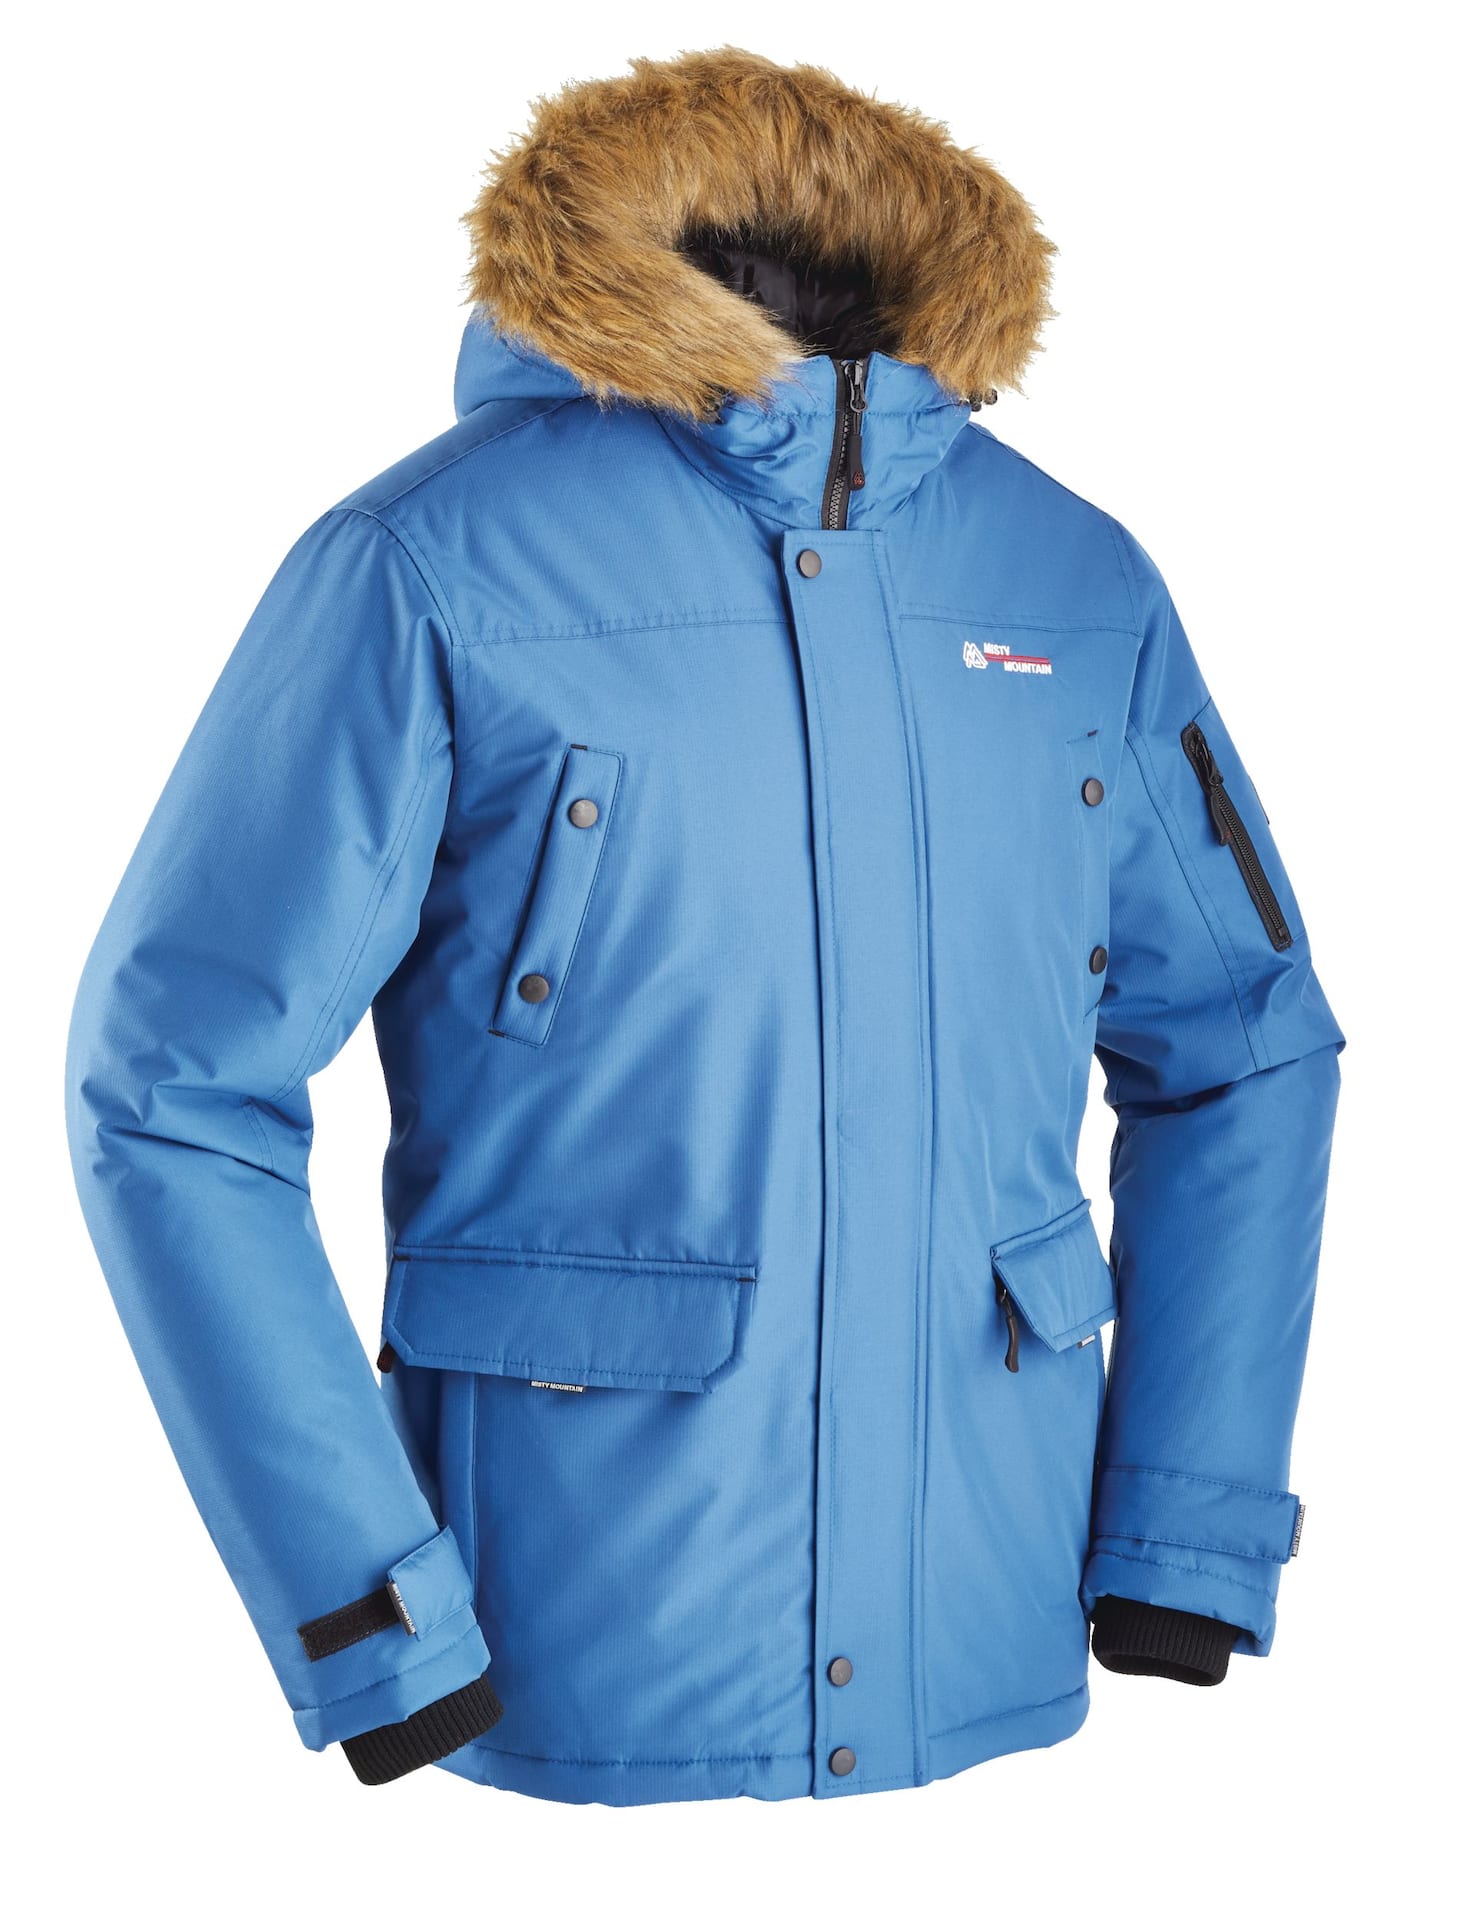 Misty Mountain Men's Duluth Insulated Jacket | Canadian Tire